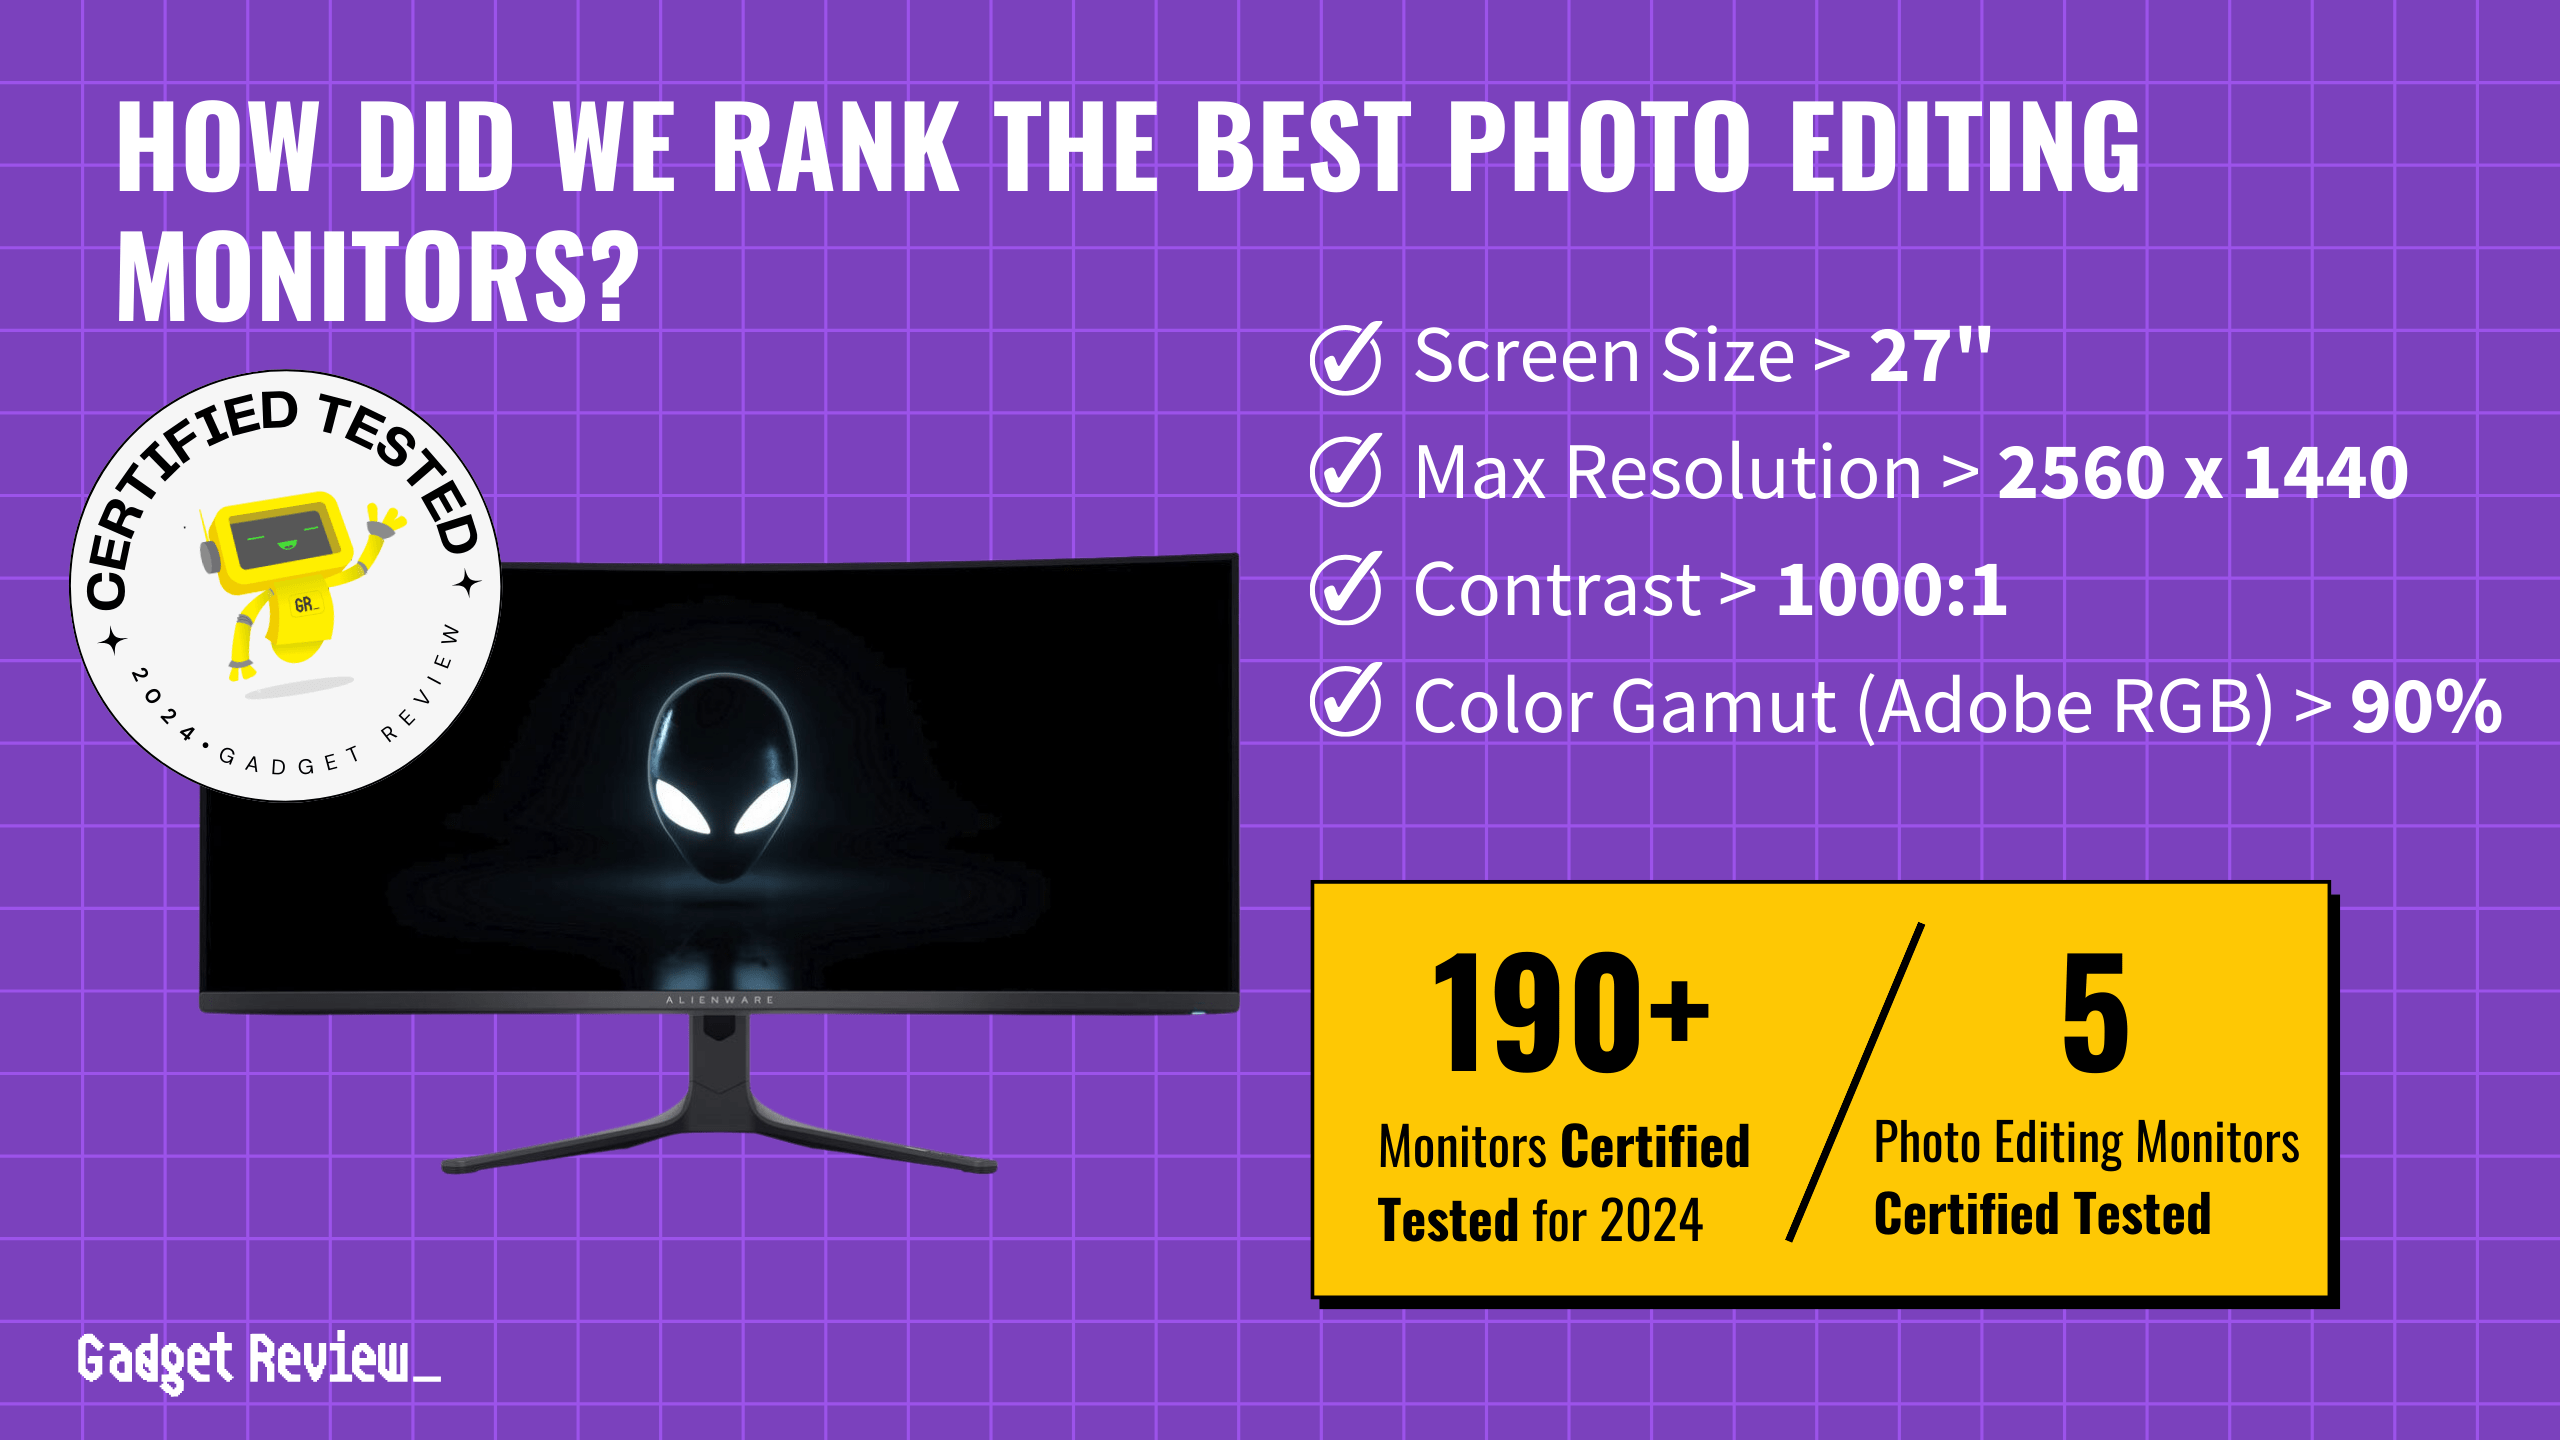 What Are The Top 4 Photo Editing Monitors?